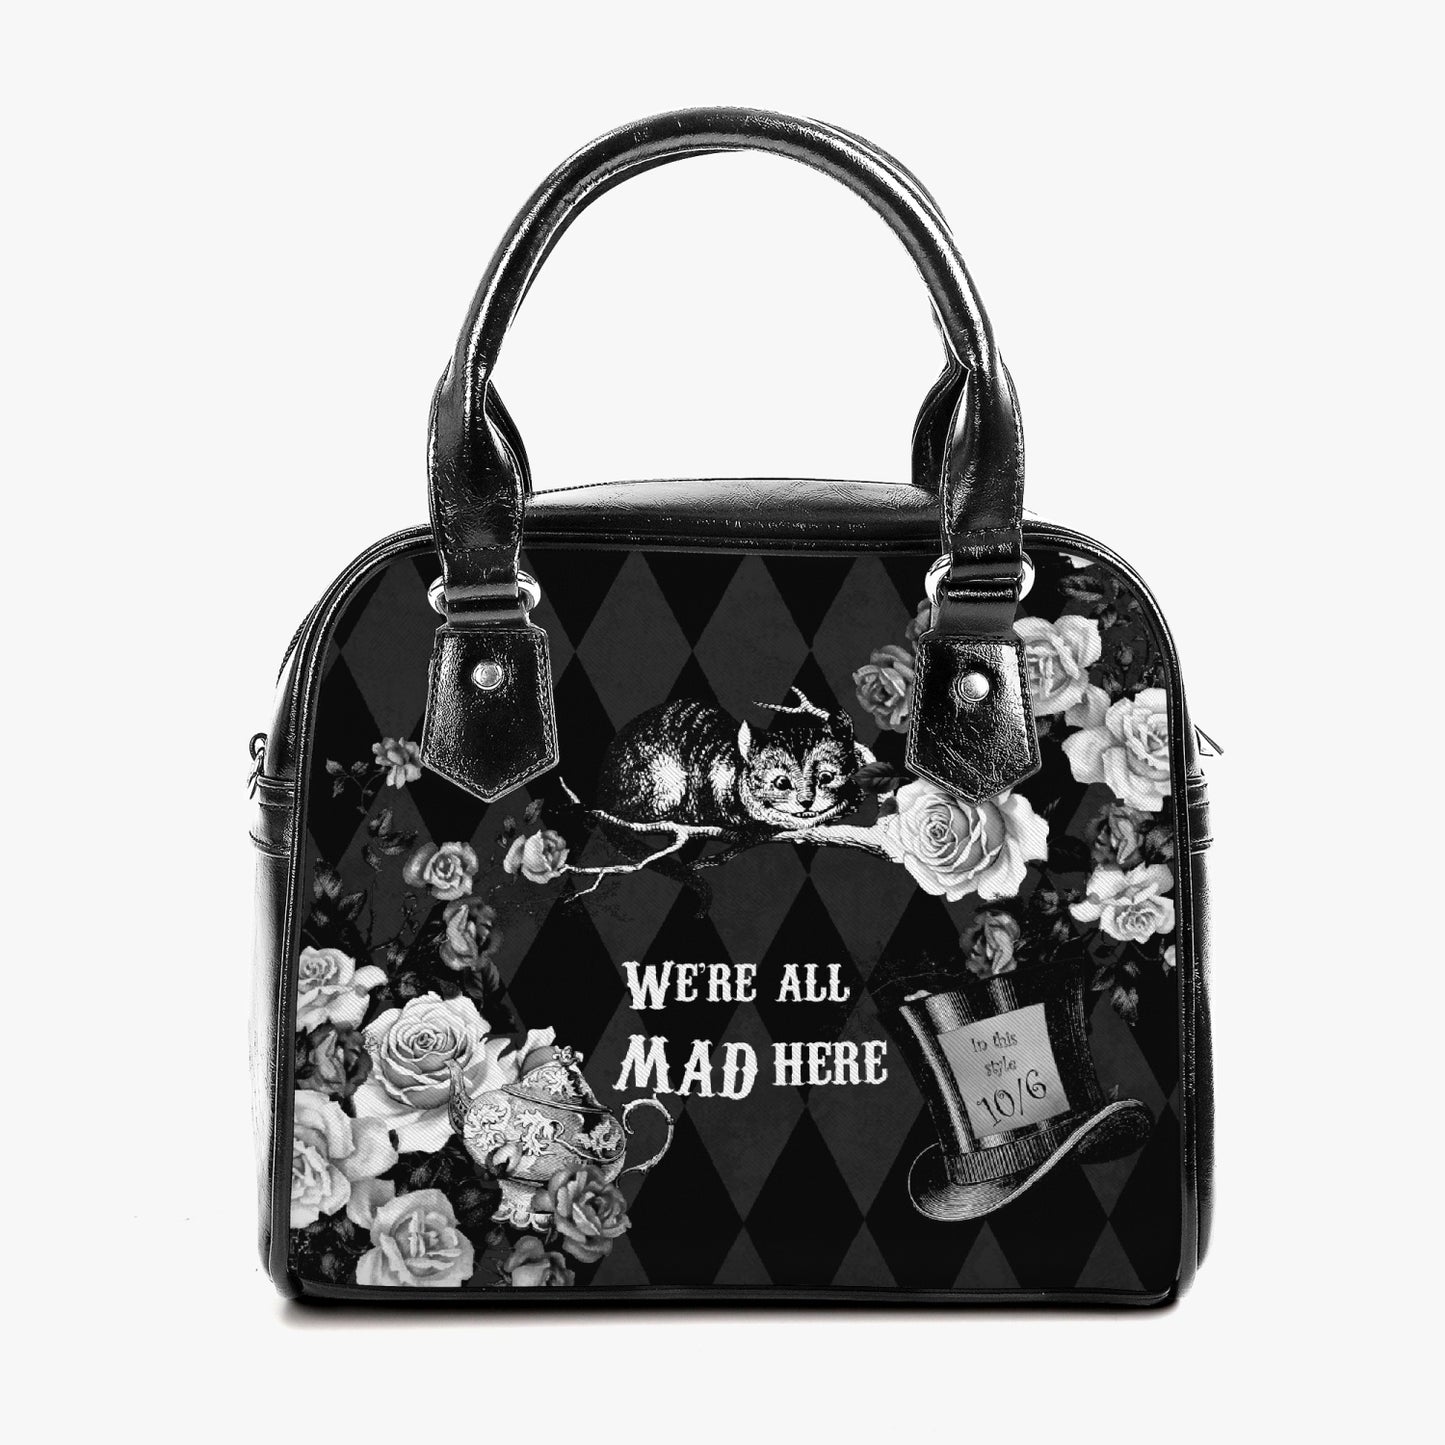 Mad Hatter Tea Party Purse - Alice in Wonderland Quote Bag (JPH1)